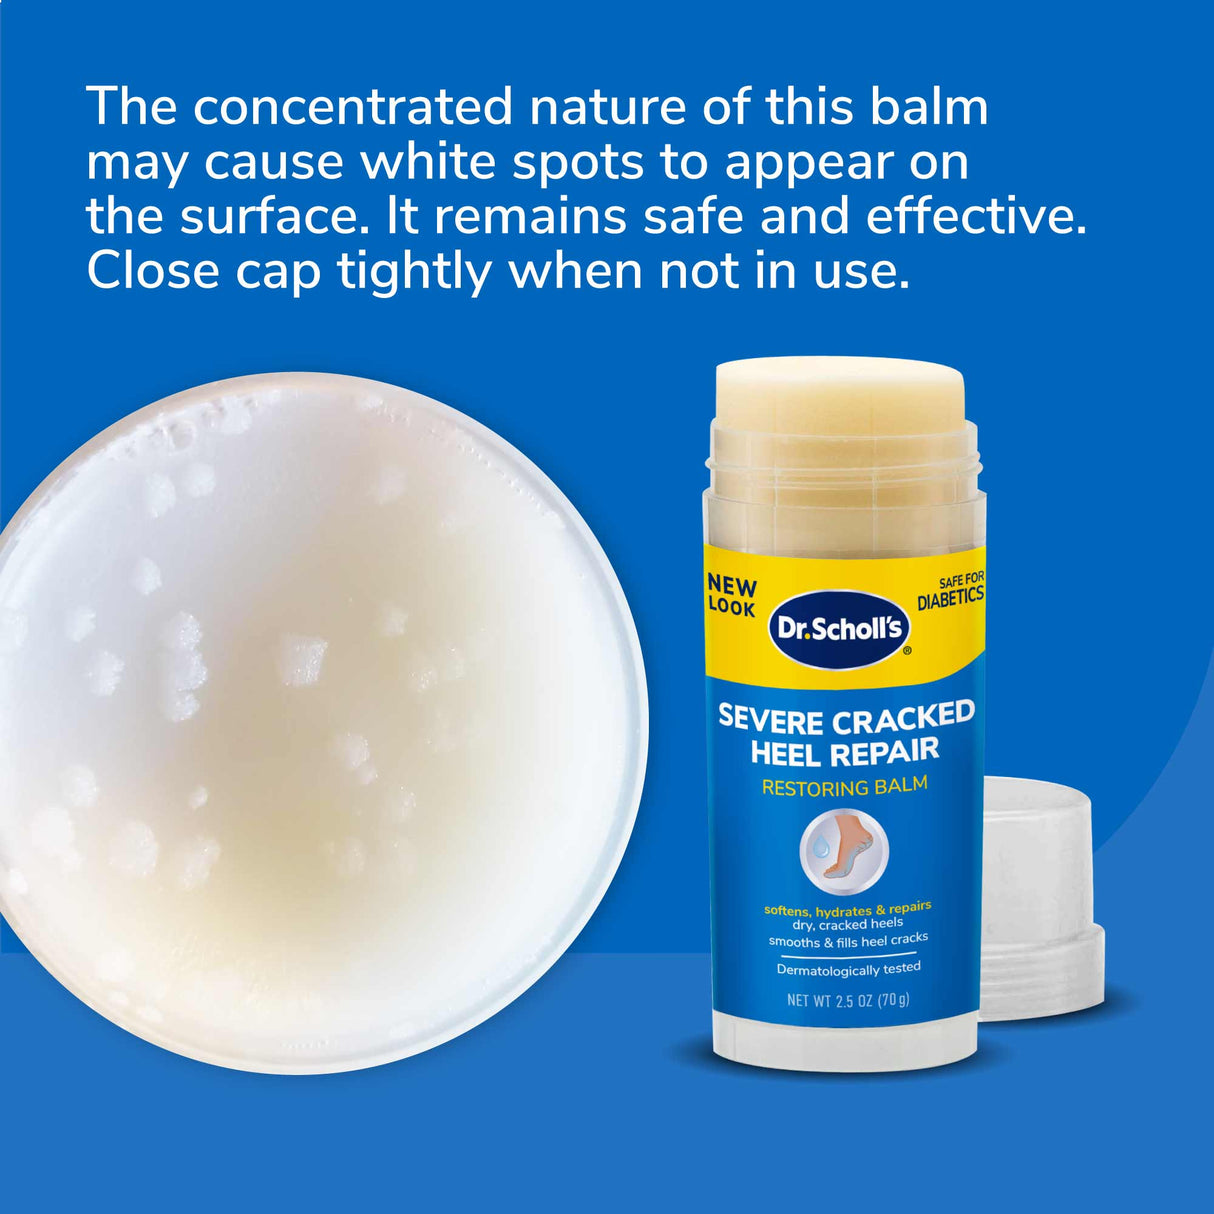 image of the concentrated nature of this balm may cause white spots to appear on the surface. It remains safe and effective